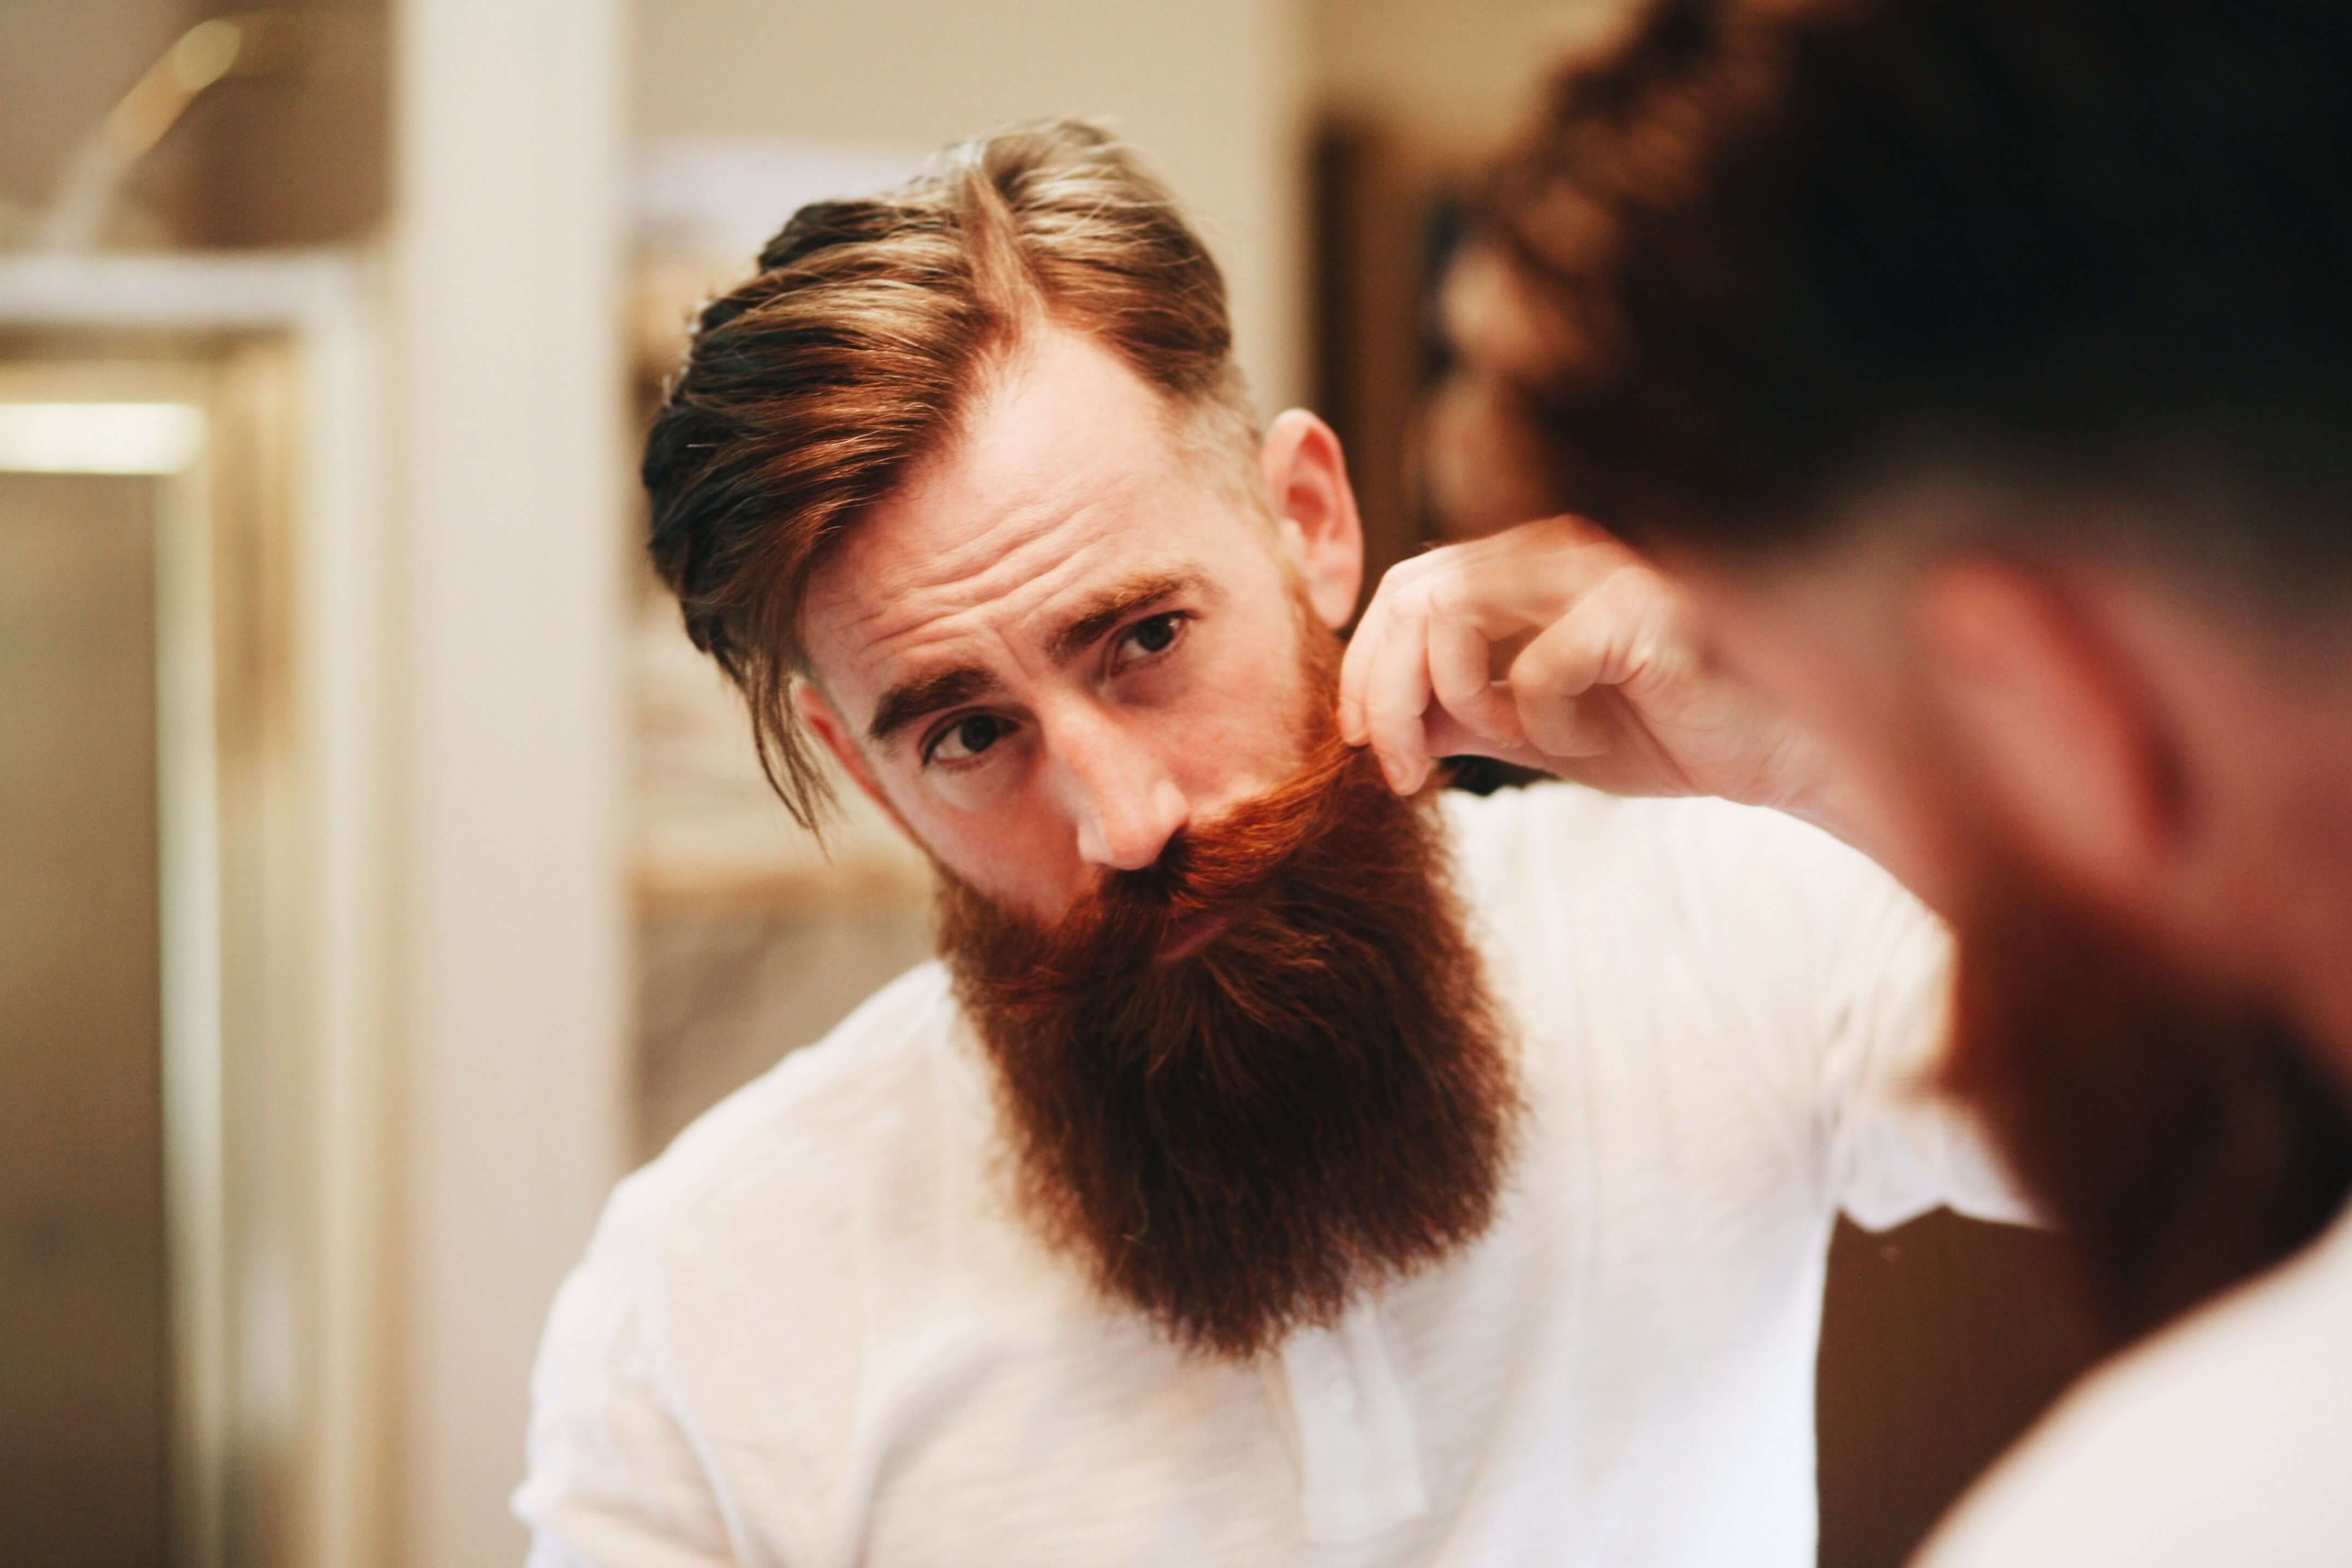 How To Grow Your Beard Faster